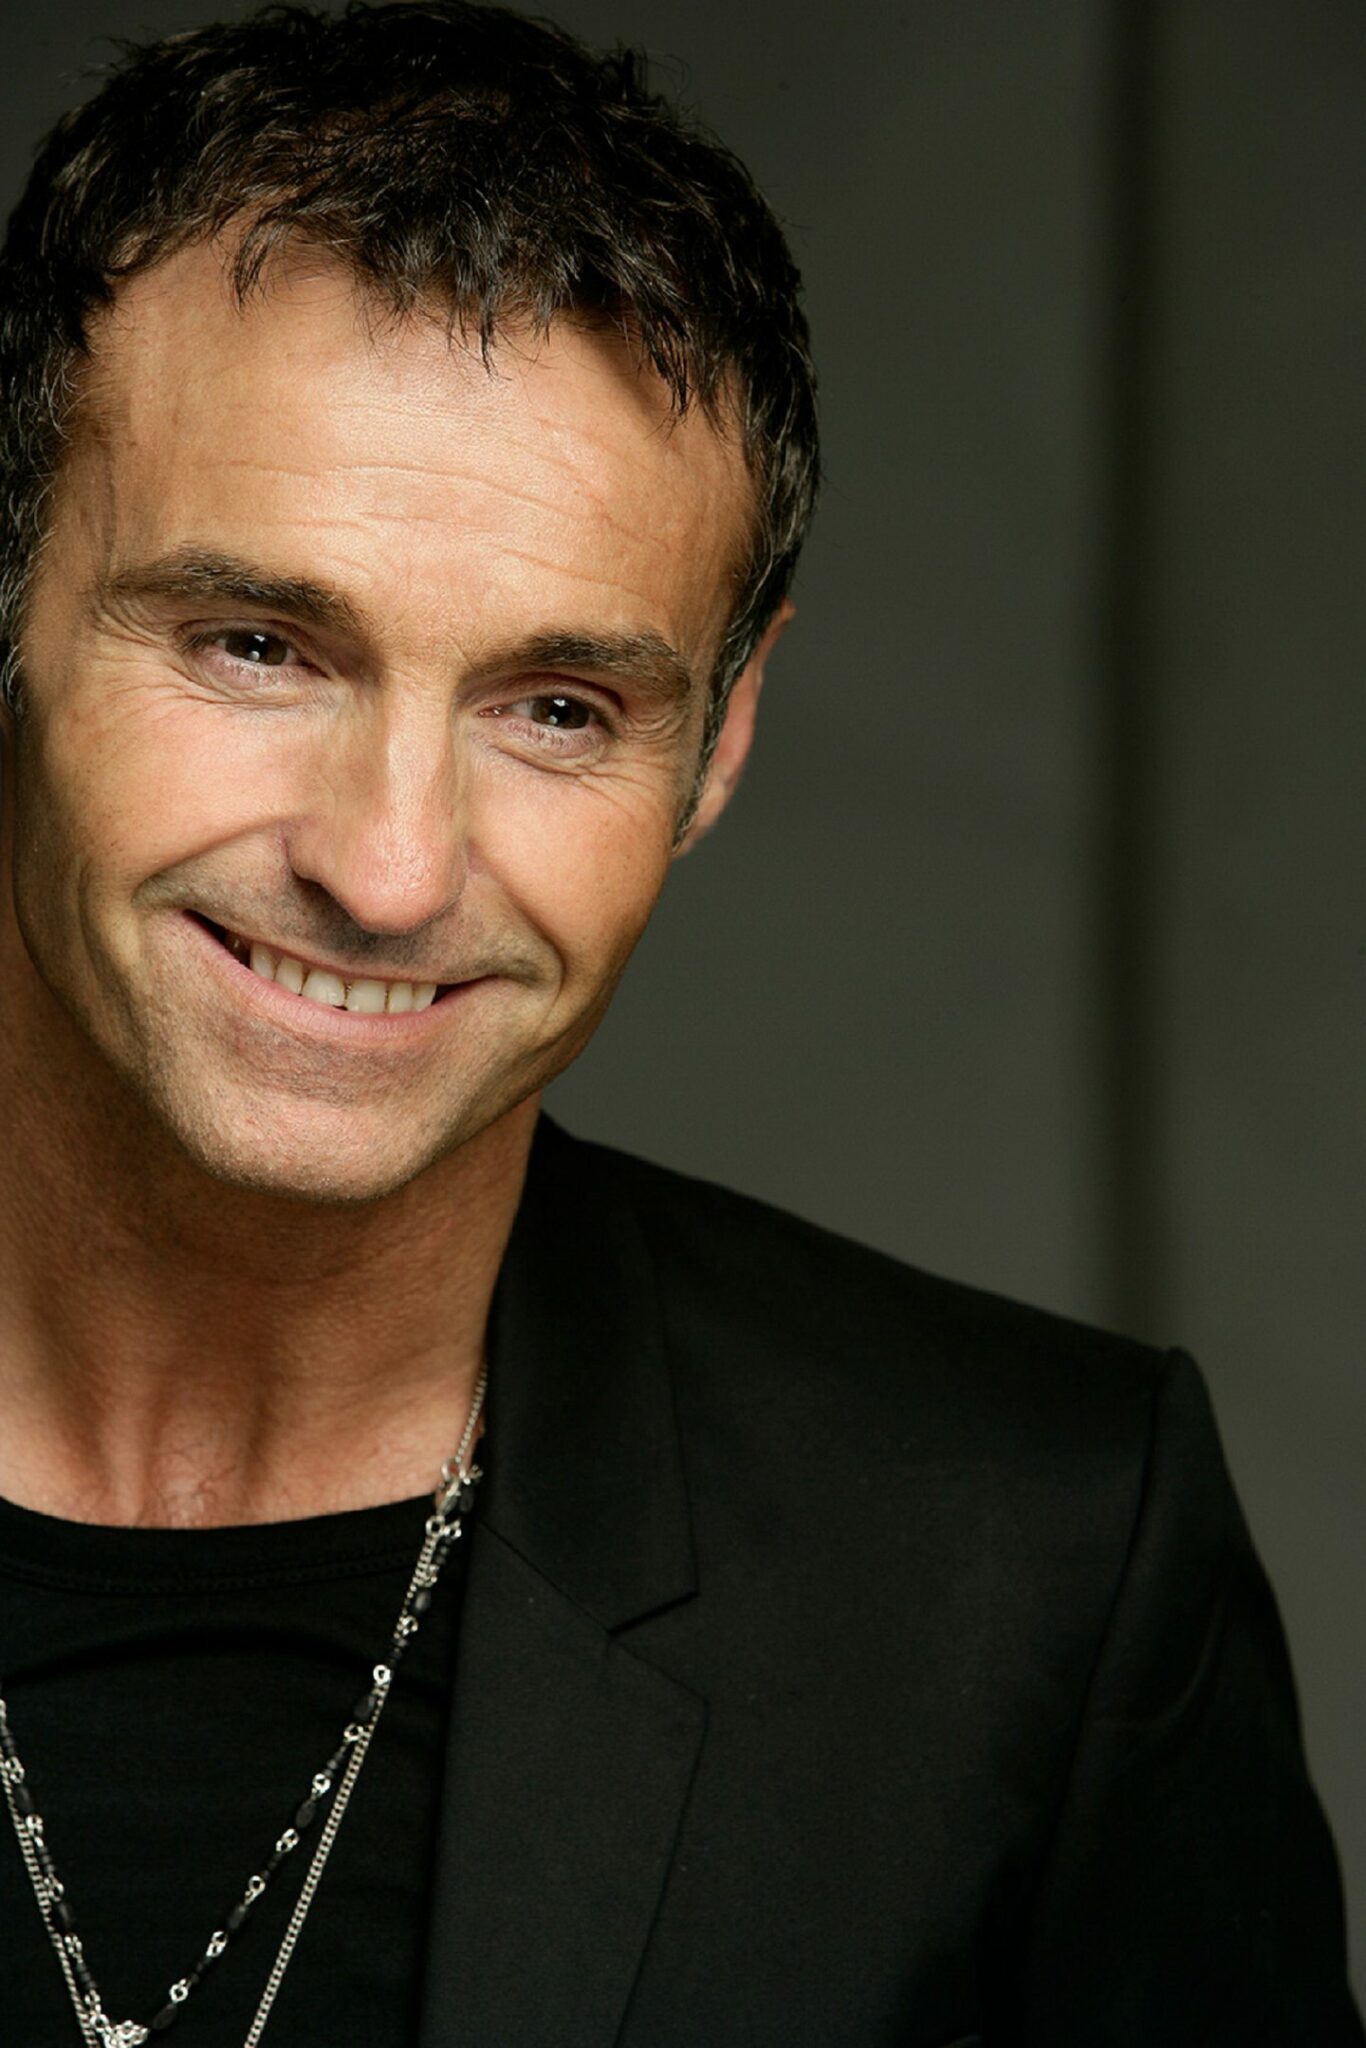 Marti Pellow urges Dundee fans to 'shout' a request ahead of Caird Hall gig